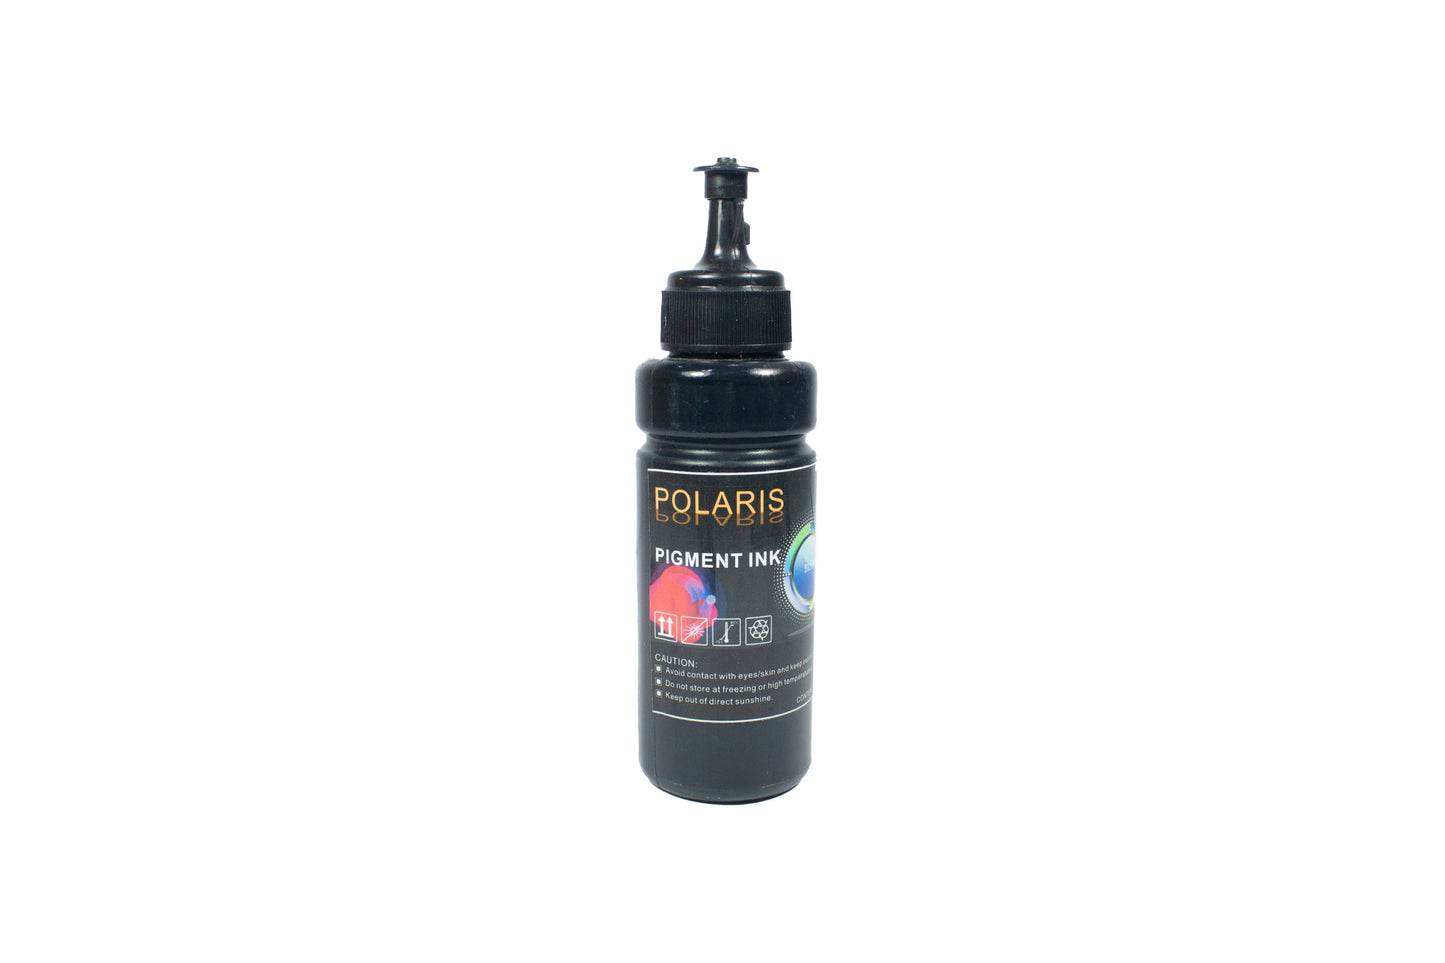 Pigment Ink Refill 100ml | Sold by 4s